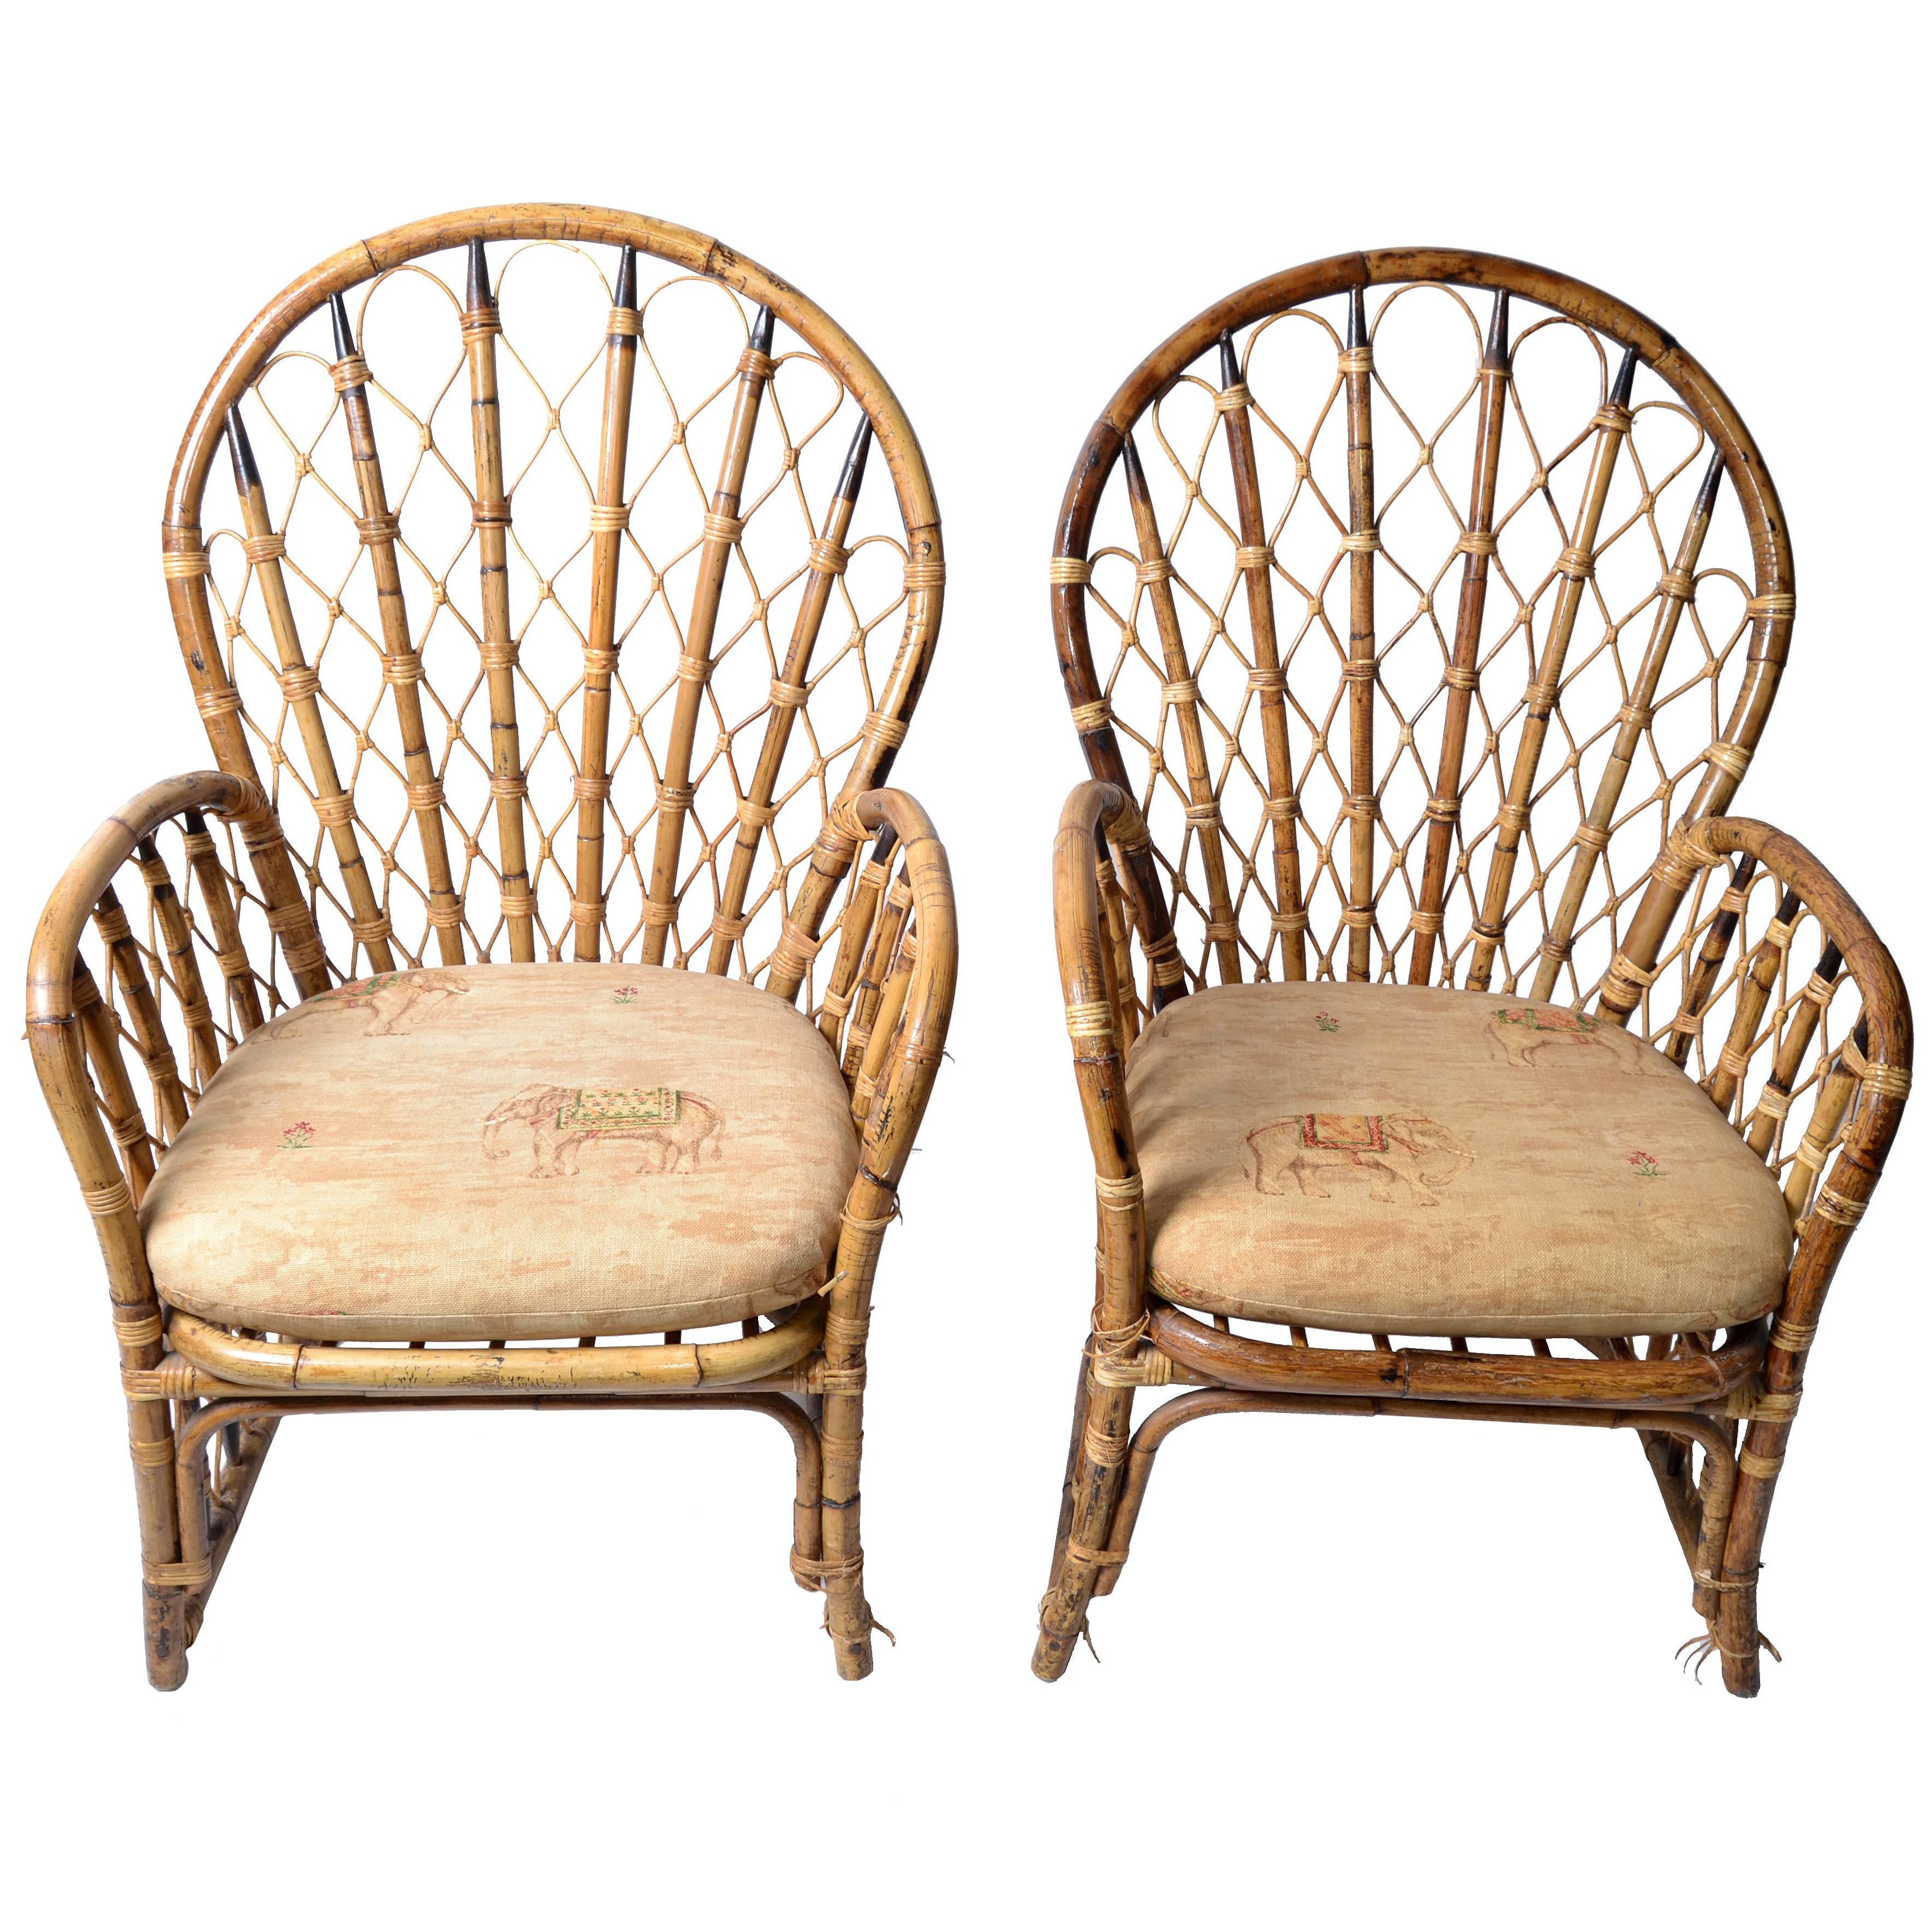 Set of two vintage rattan, wicker and bamboo dining chairs for your Pavilion.
Chinese inspired bamboo patterns.
Handcrafted and made in the Philippines.
They have each a seat cushion.
Labelled on one chair.
Measures: Arm height 24.5